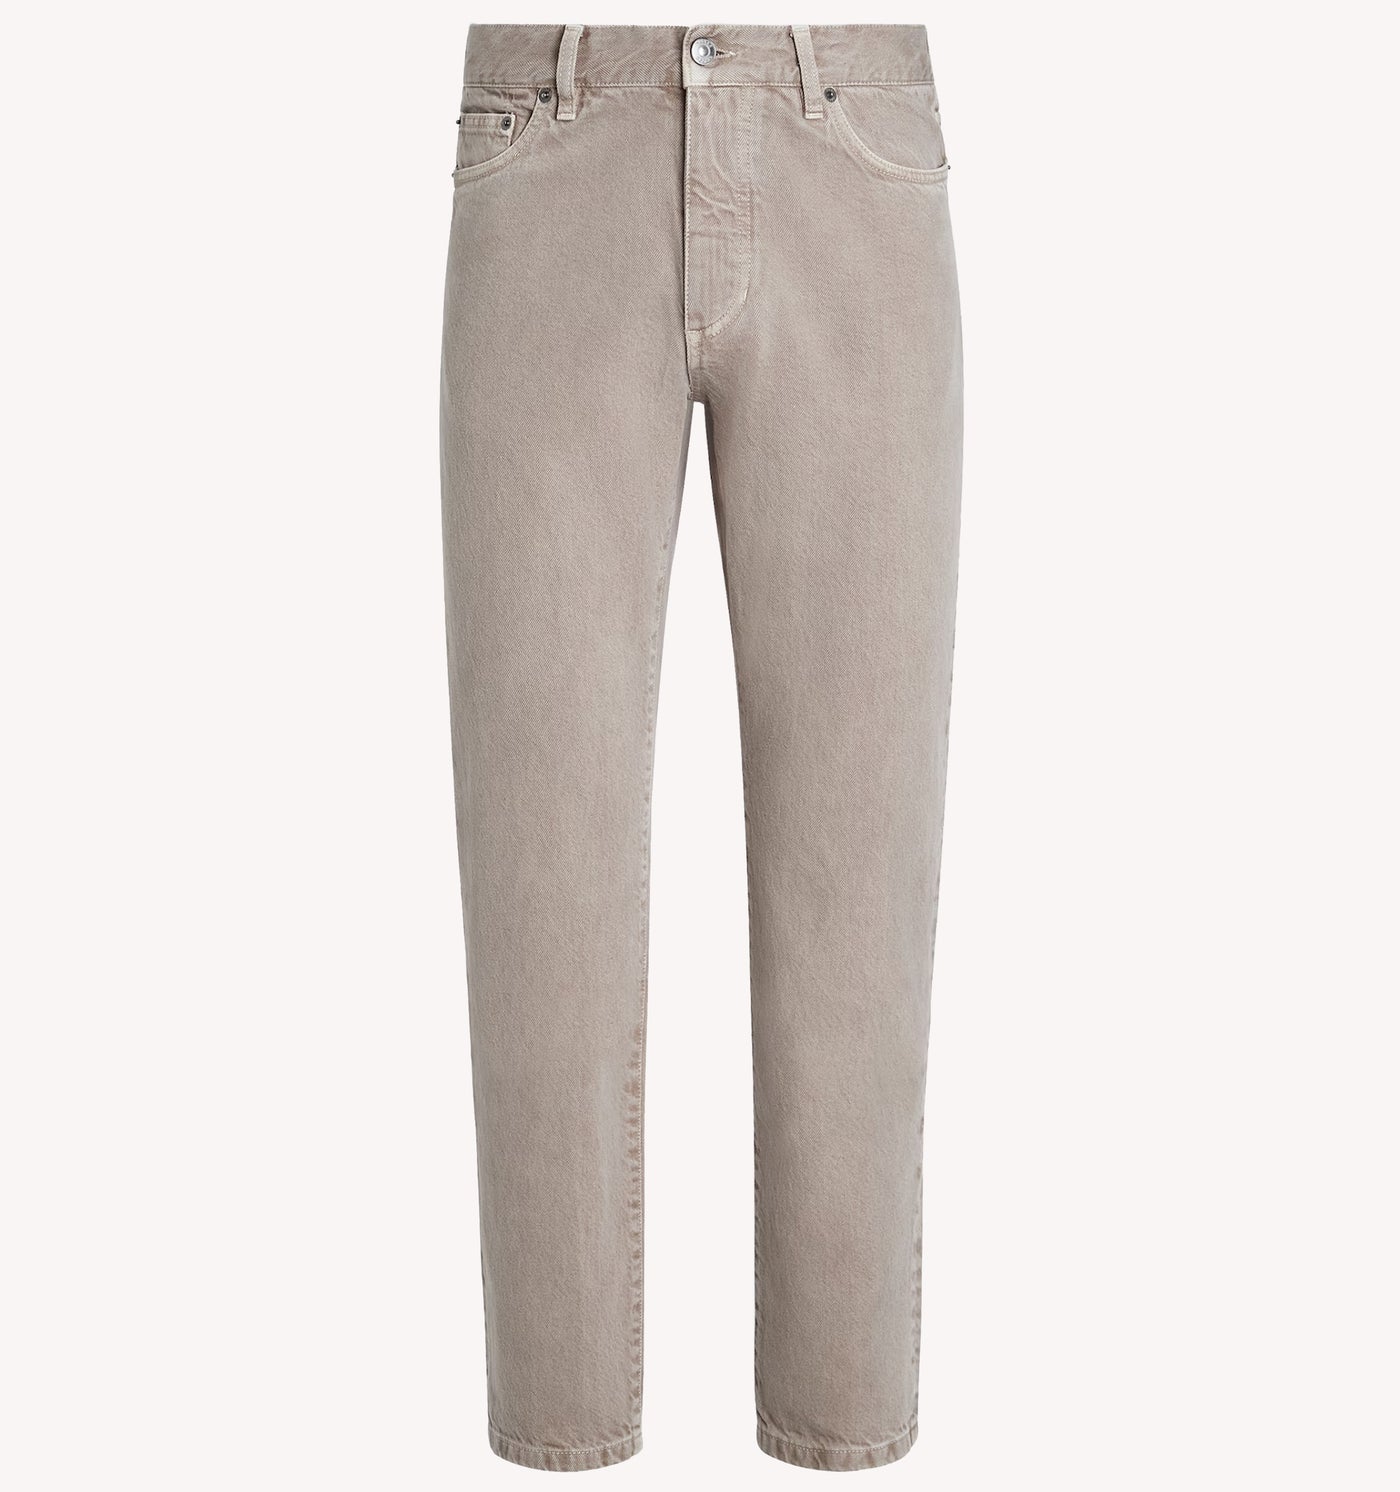 Zegna Gan Jeans in Light Taupe Marble